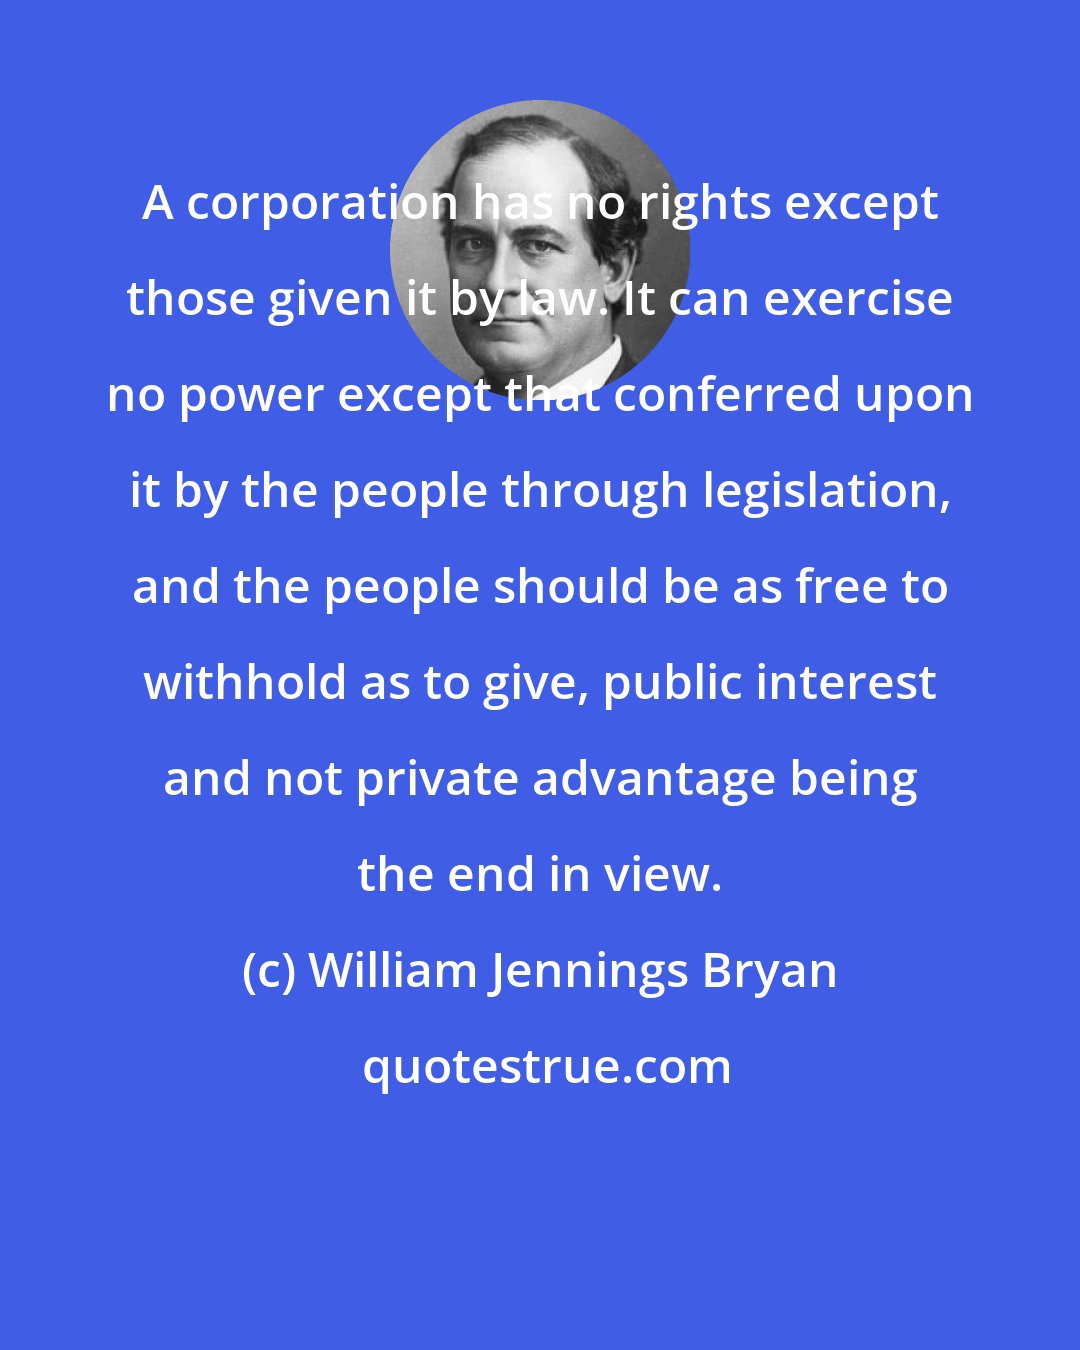 William Jennings Bryan: A corporation has no rights except those given it by law. It can exercise no power except that conferred upon it by the people through legislation, and the people should be as free to withhold as to give, public interest and not private advantage being the end in view.